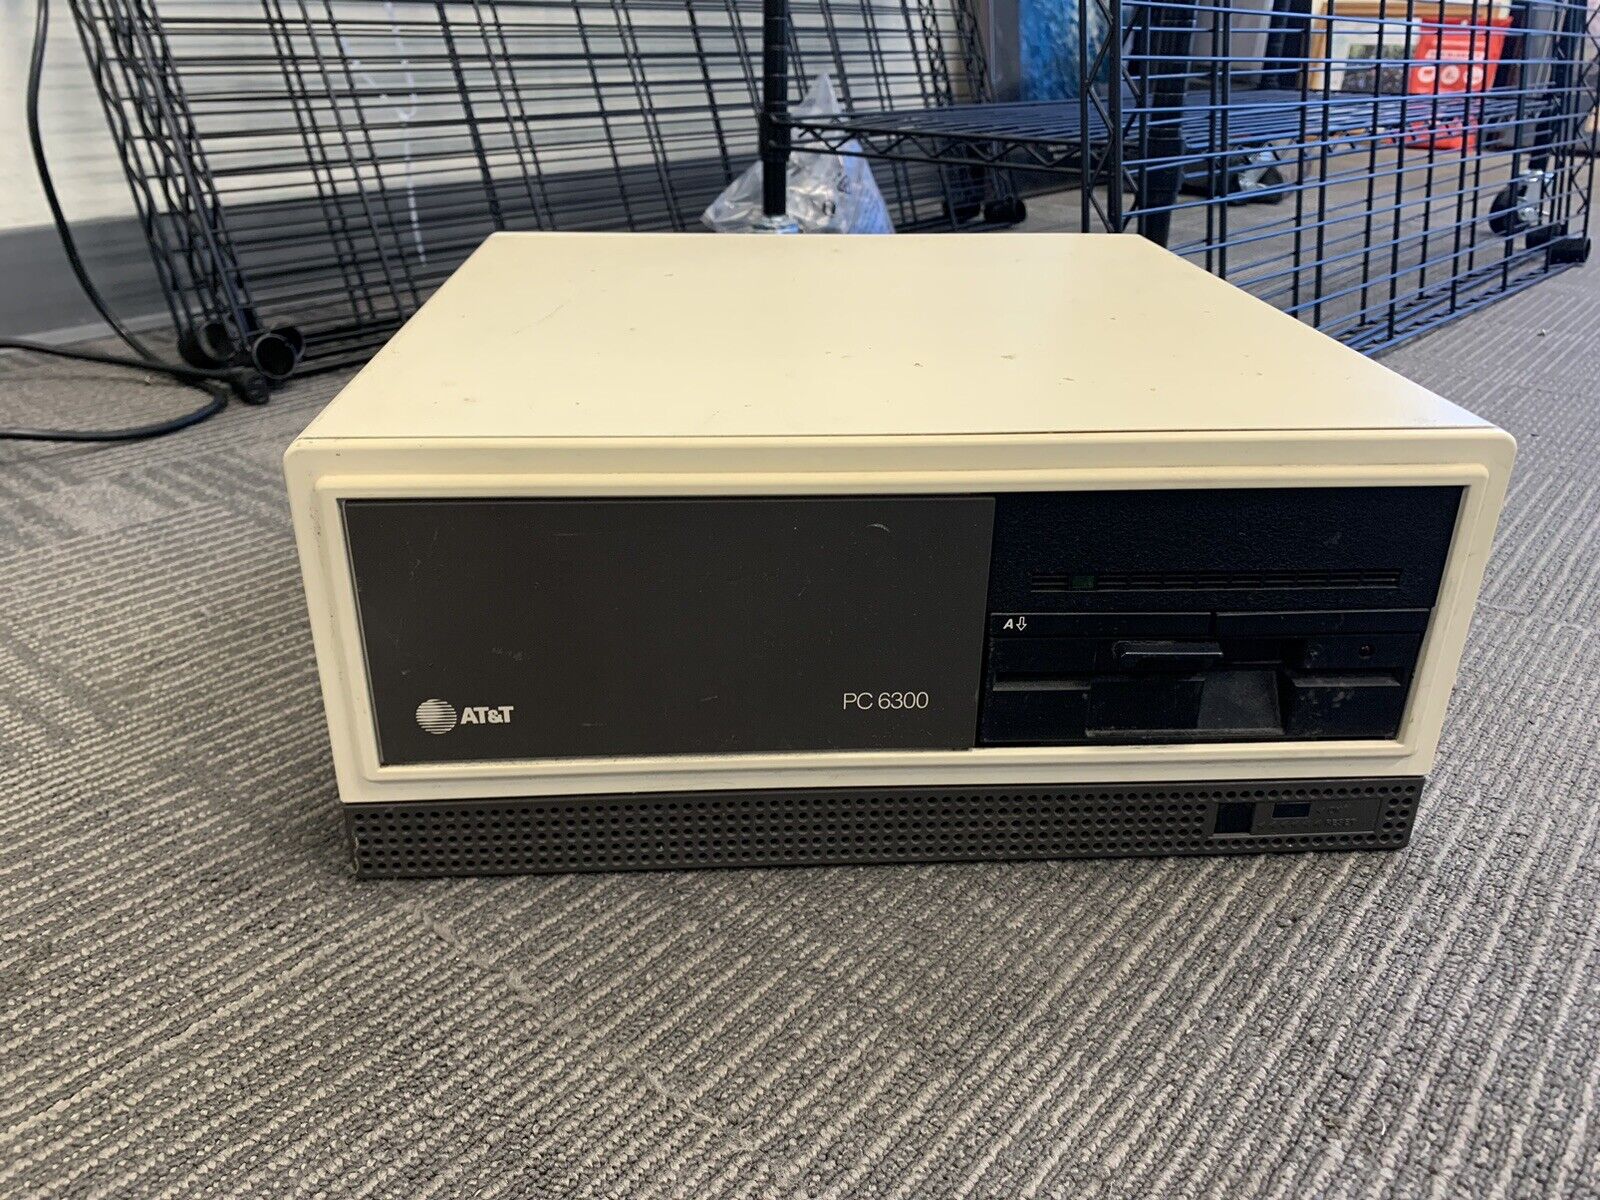 Vintage AT&T PC 6300 Computer - UNTESTED